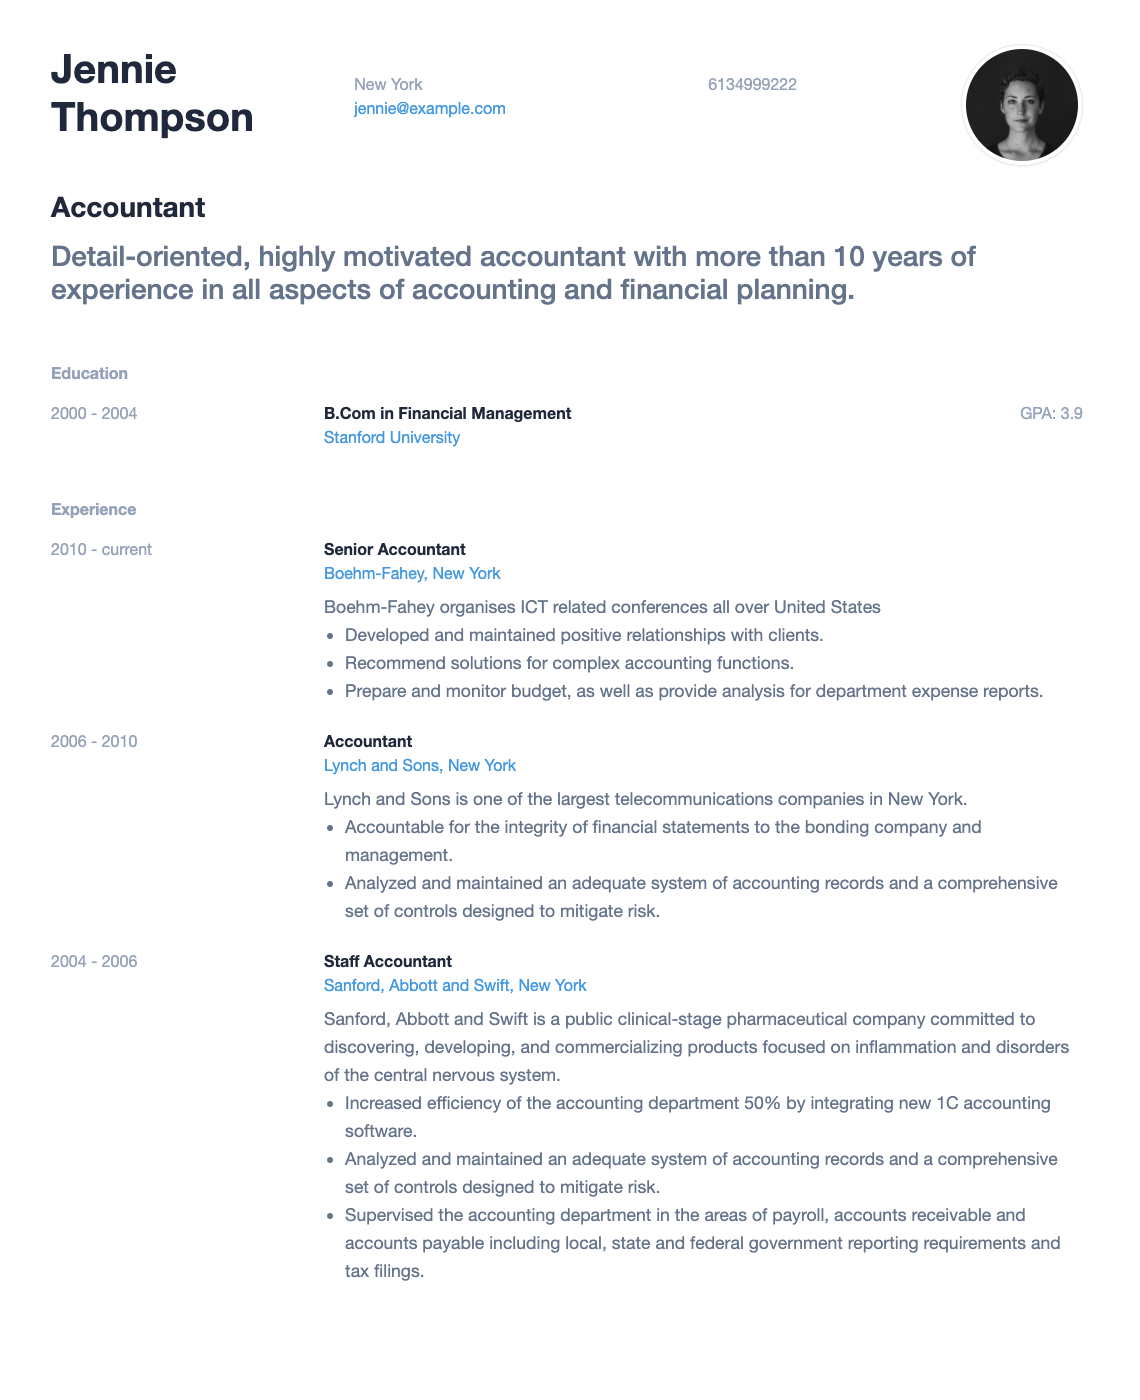 Shows one of the hipCV resume templates